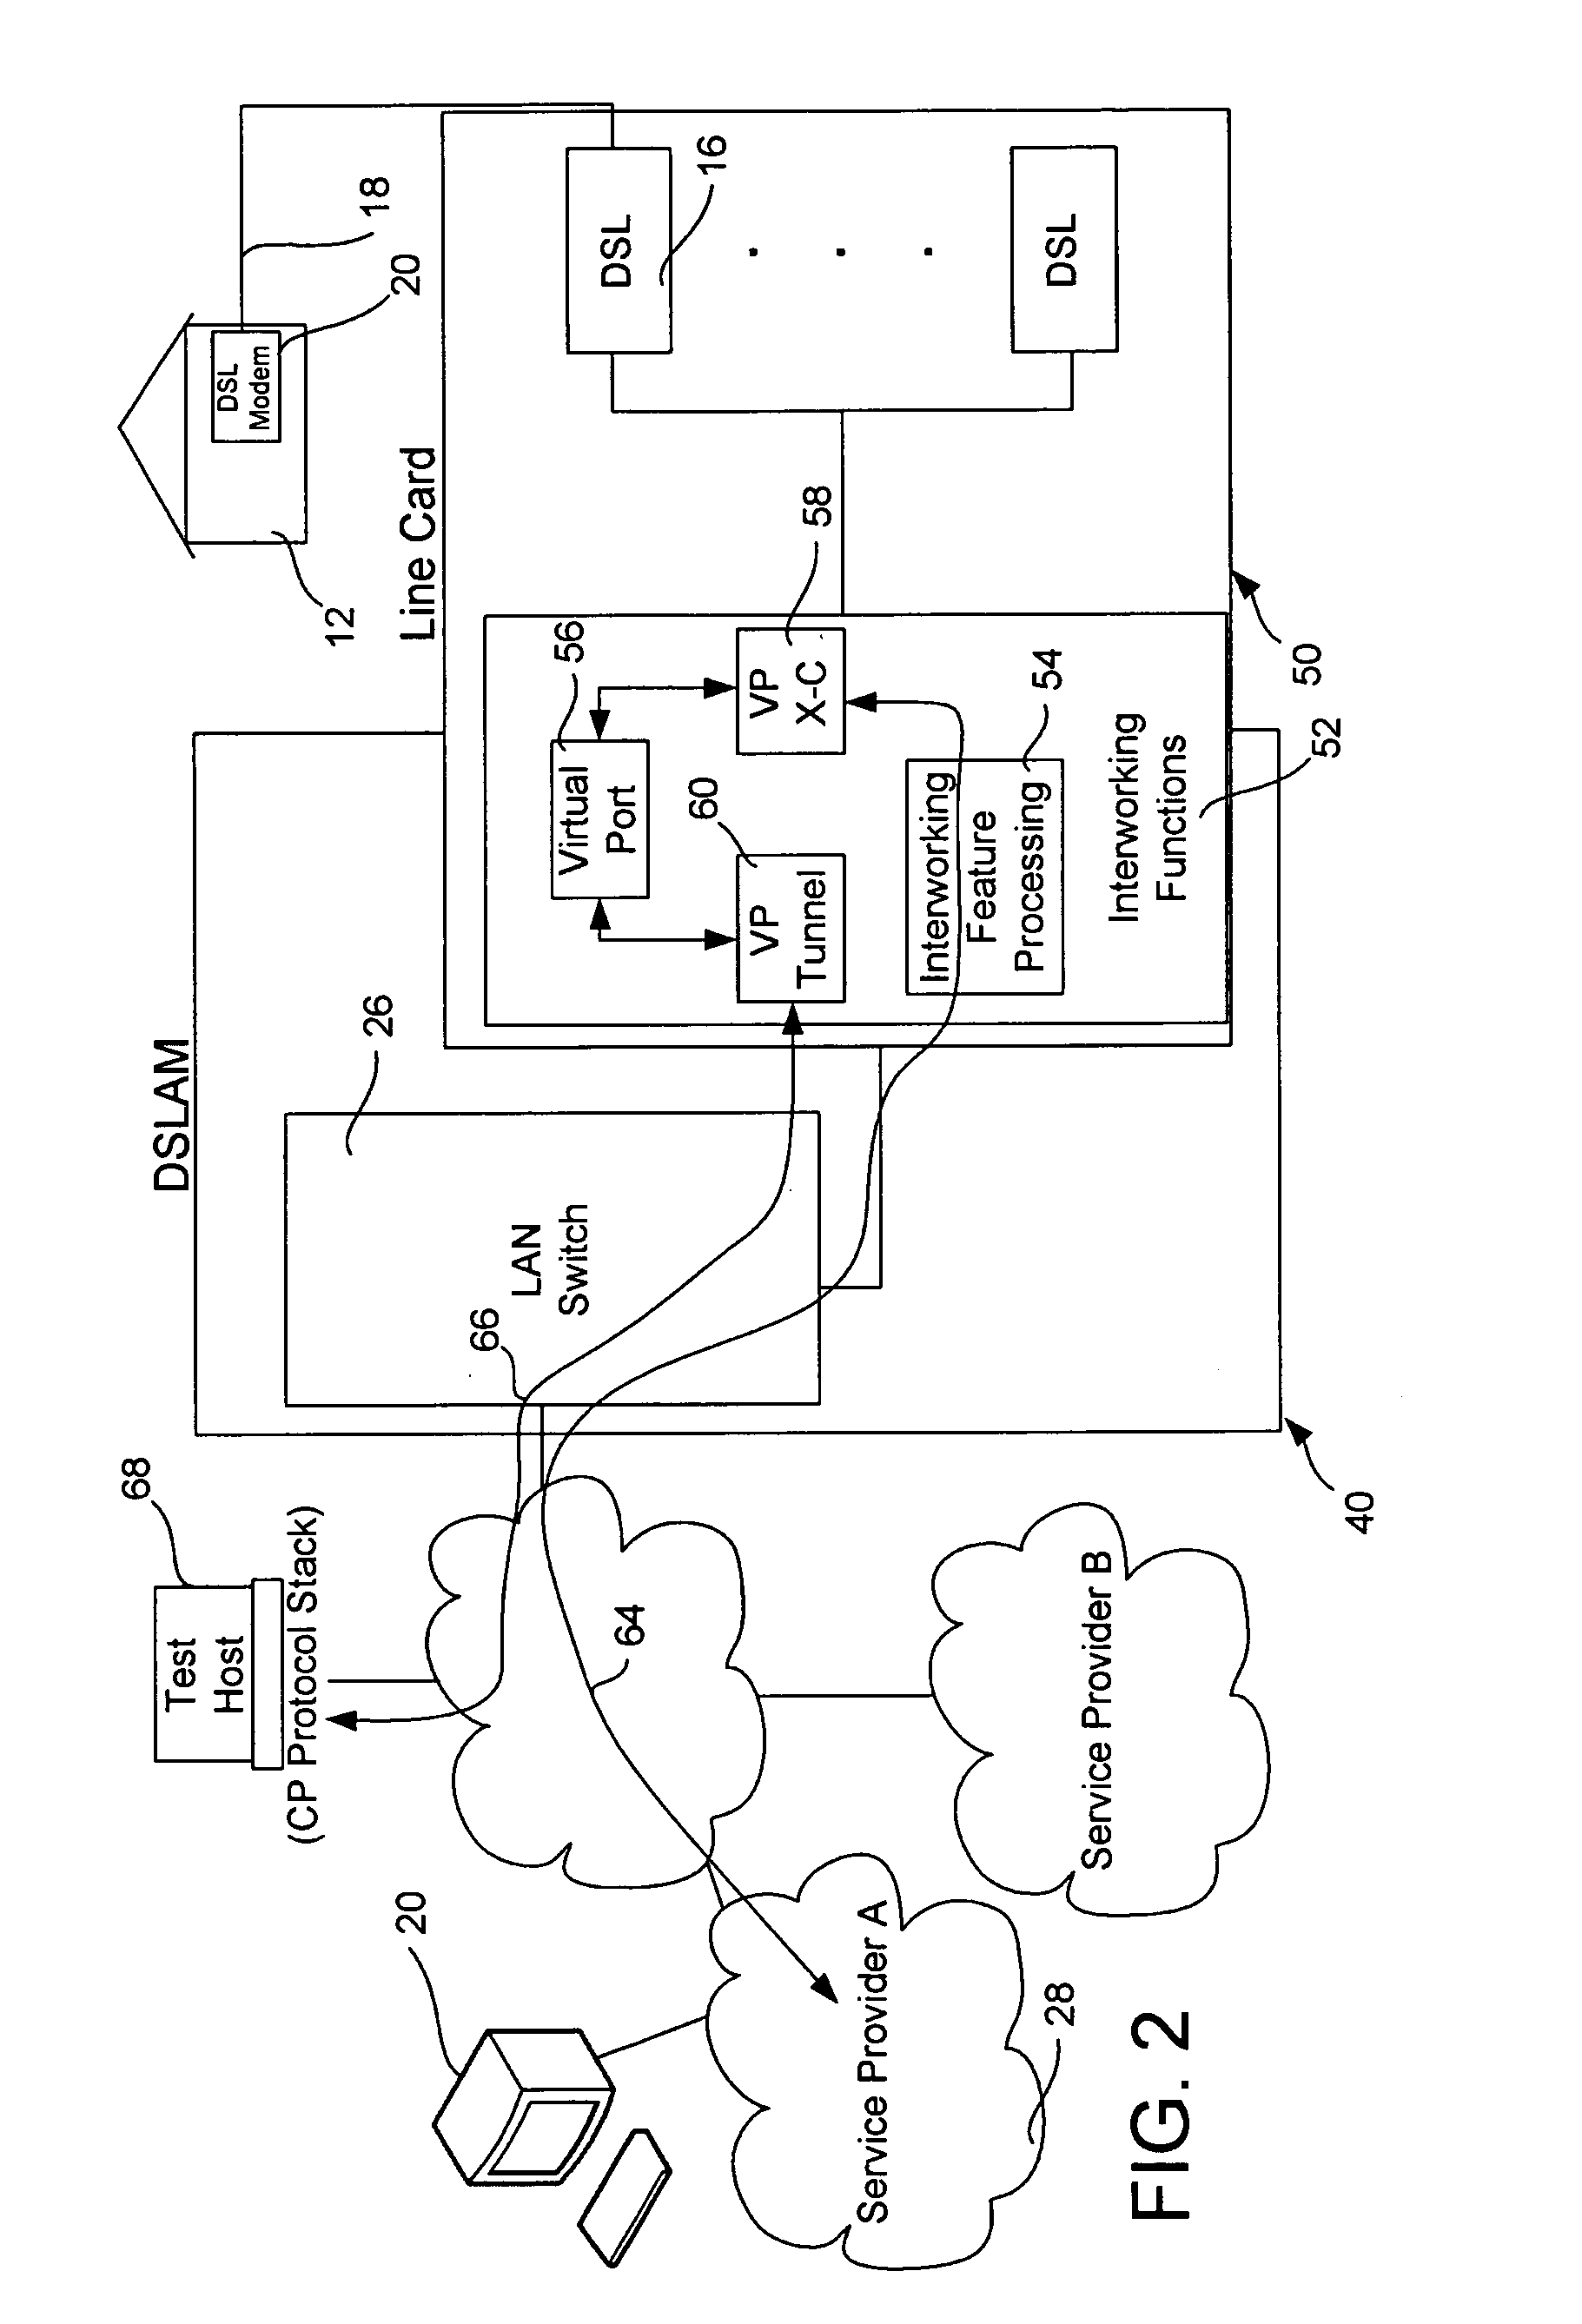 Method and apparatus for verifying service provisioning in networks used to provide digital subscriber line services